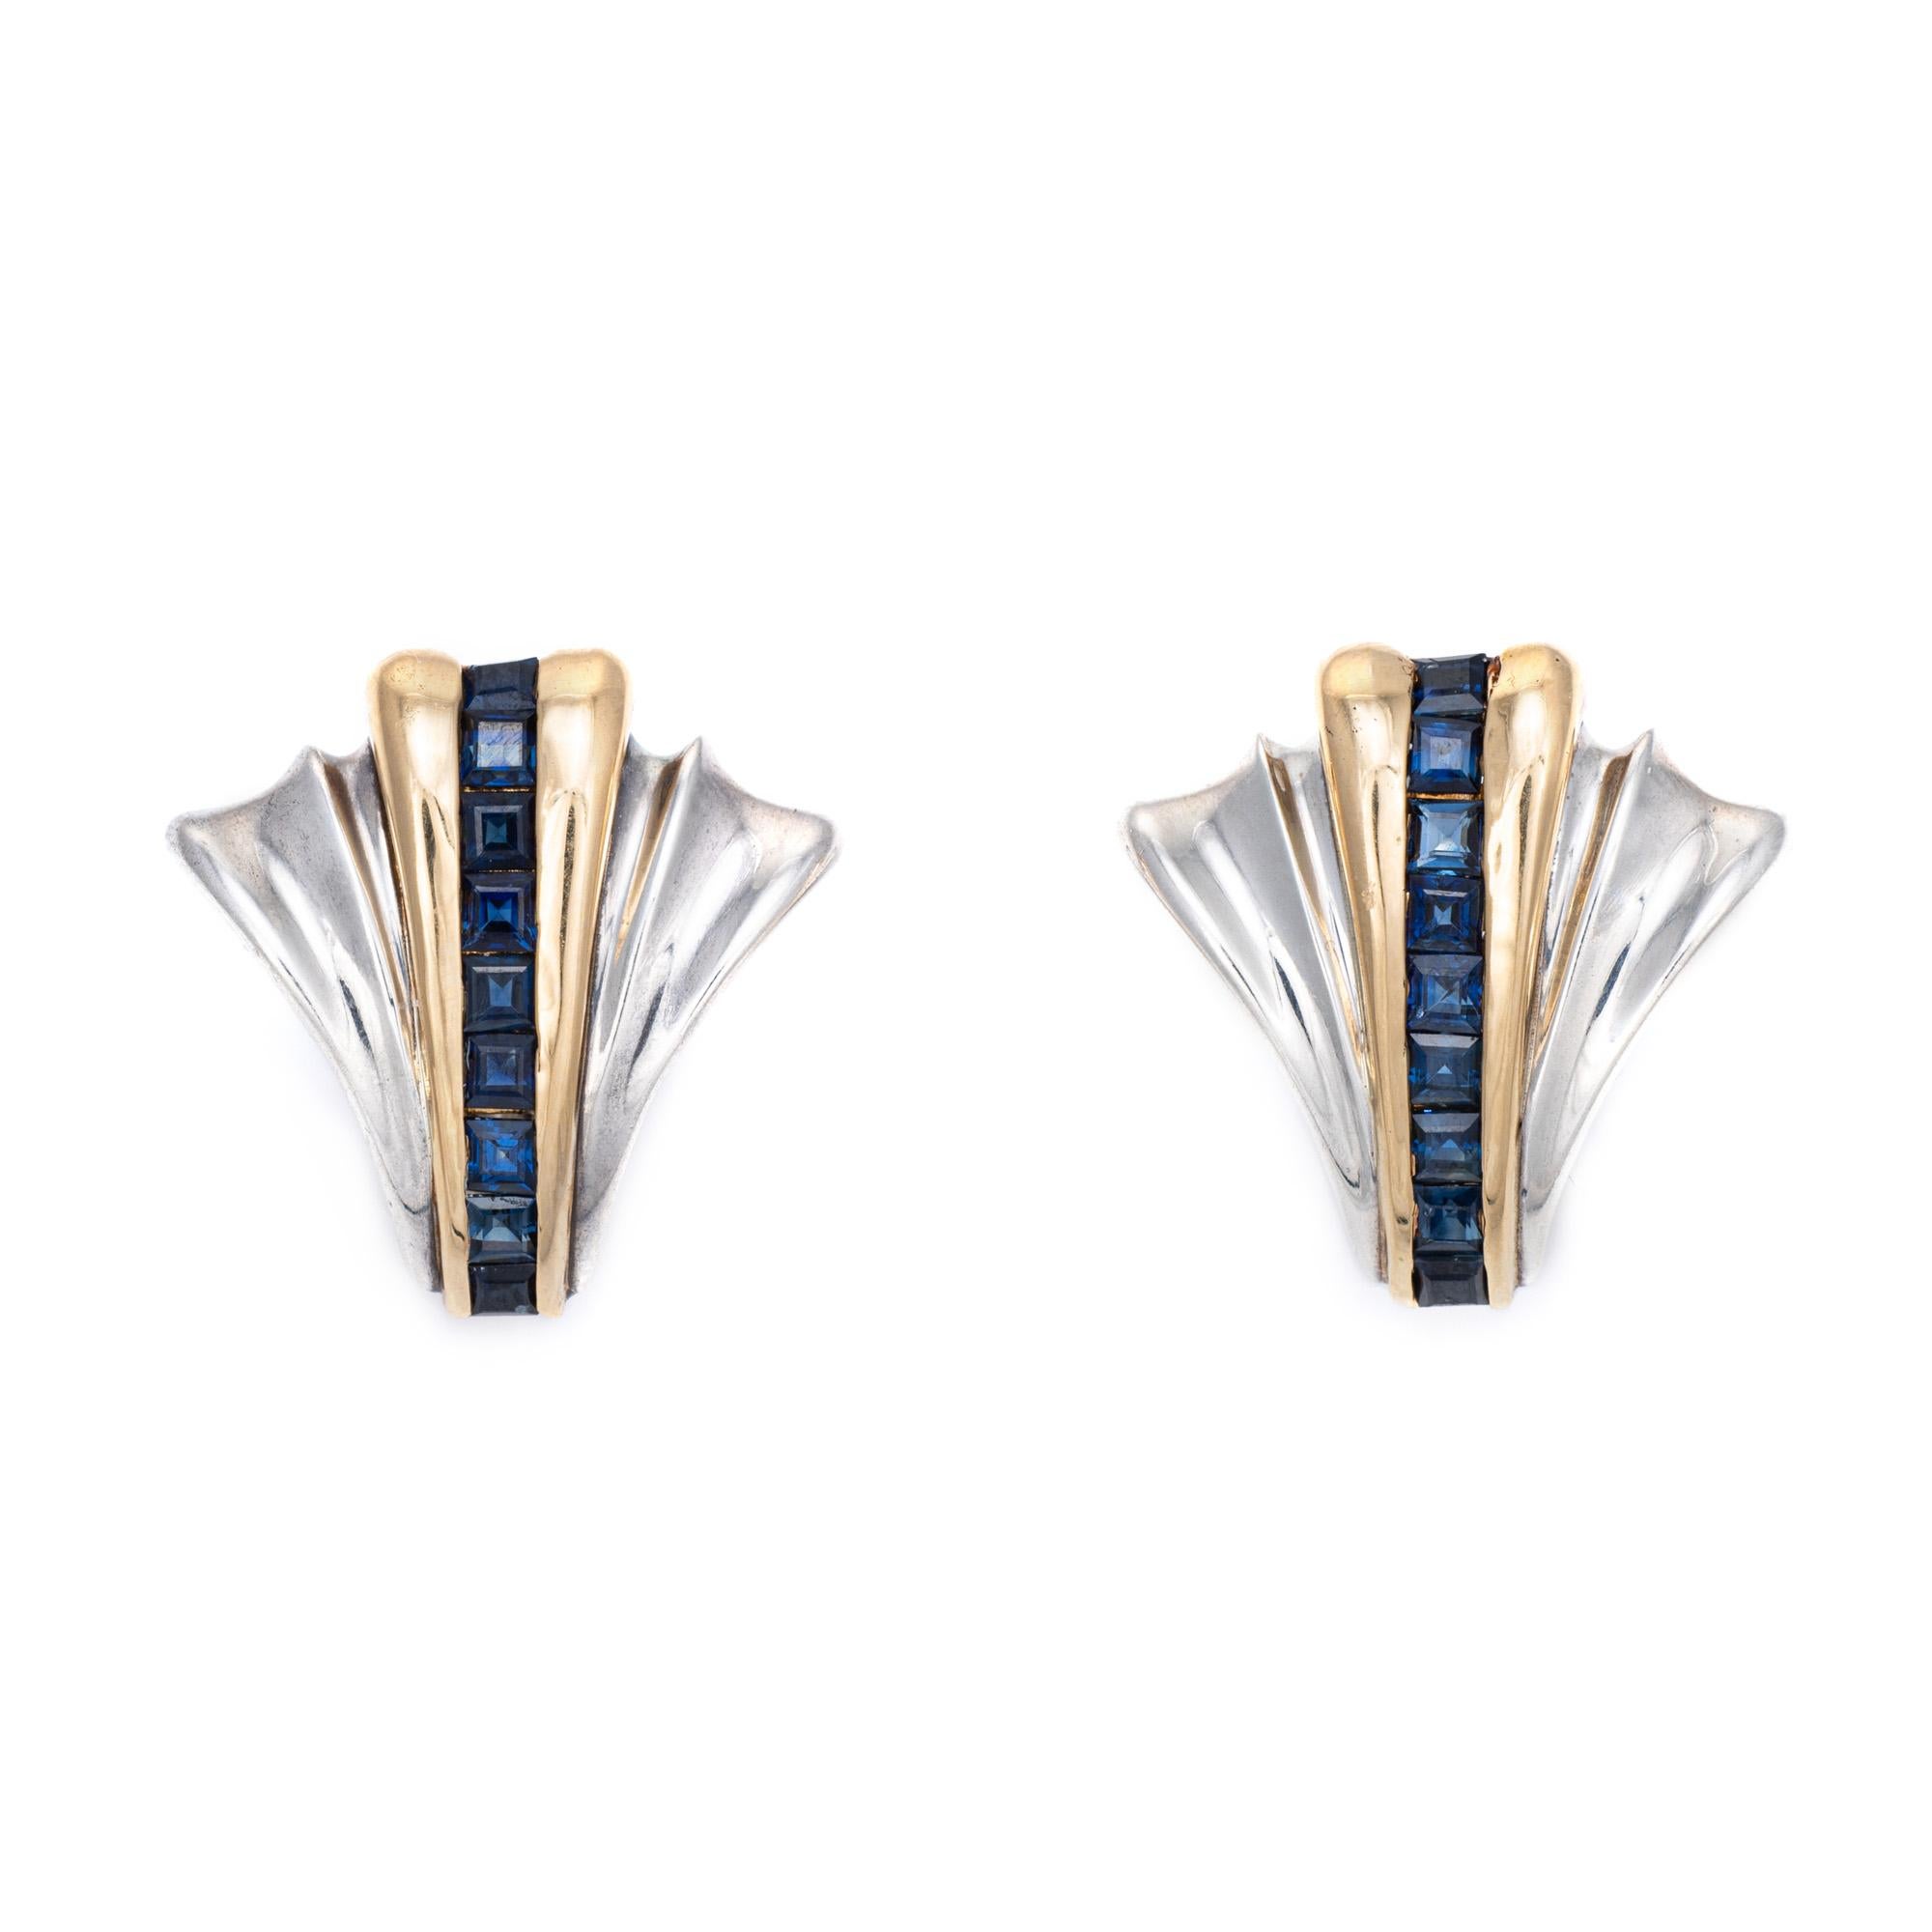 Finely detailed pair of vintage Tiffany & Co Atlas earrings crafted in sterling silver & 14k yellow gold. 

Square cut sapphires total an estimated 1 carat. 
The beautifully detailed earrings are designed in the Art Deco style, with a strand of blue